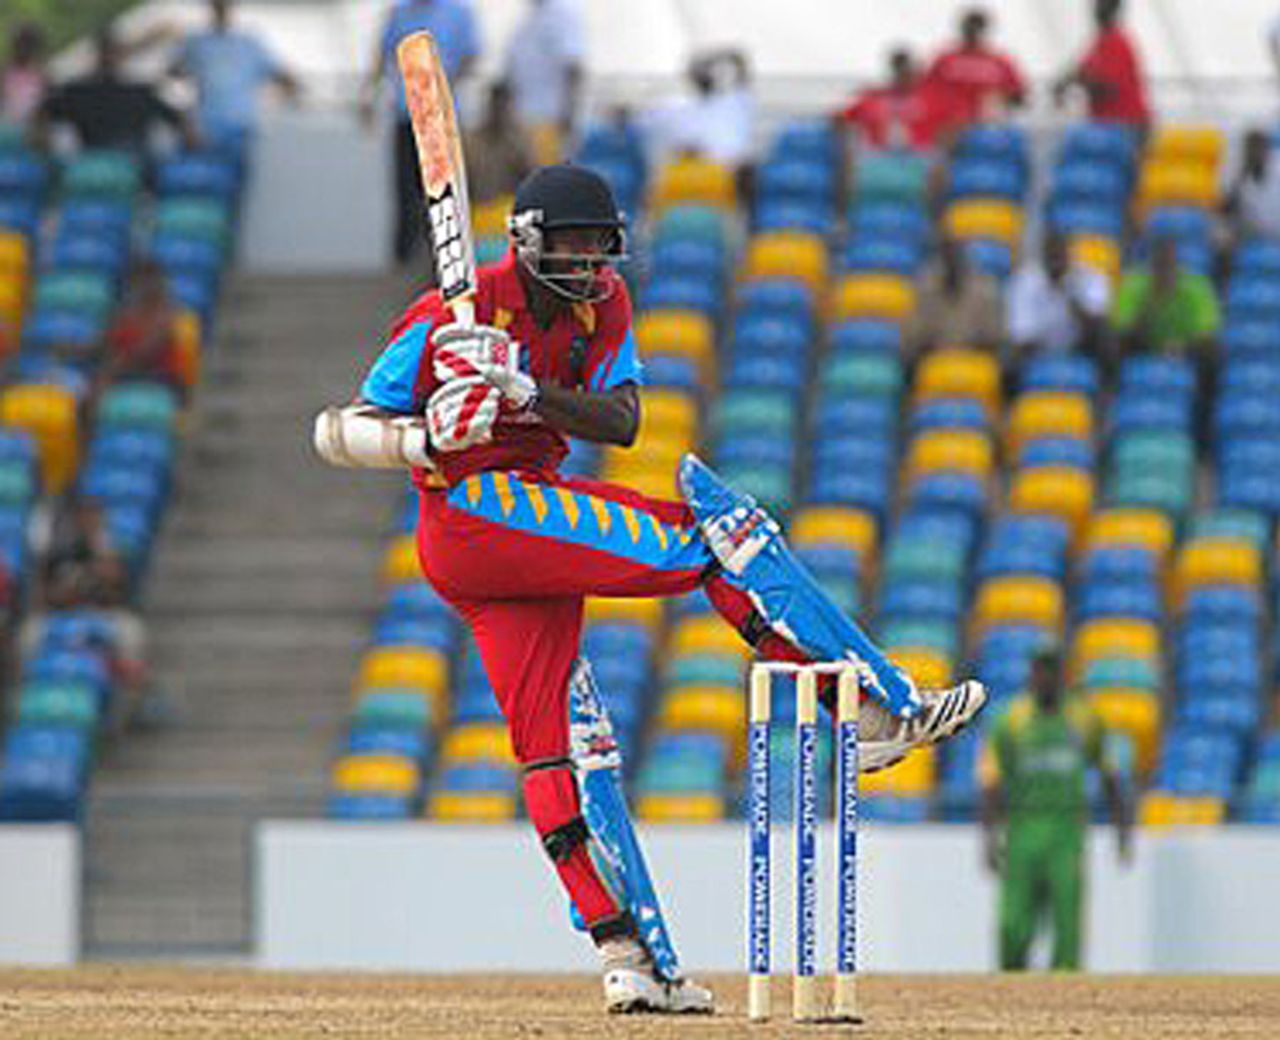 Floyd Reifer pulls during his knock of 49, Combined Campuses and Colleges v Guyana, Caribbean T20, Barbados, July 25, 2010